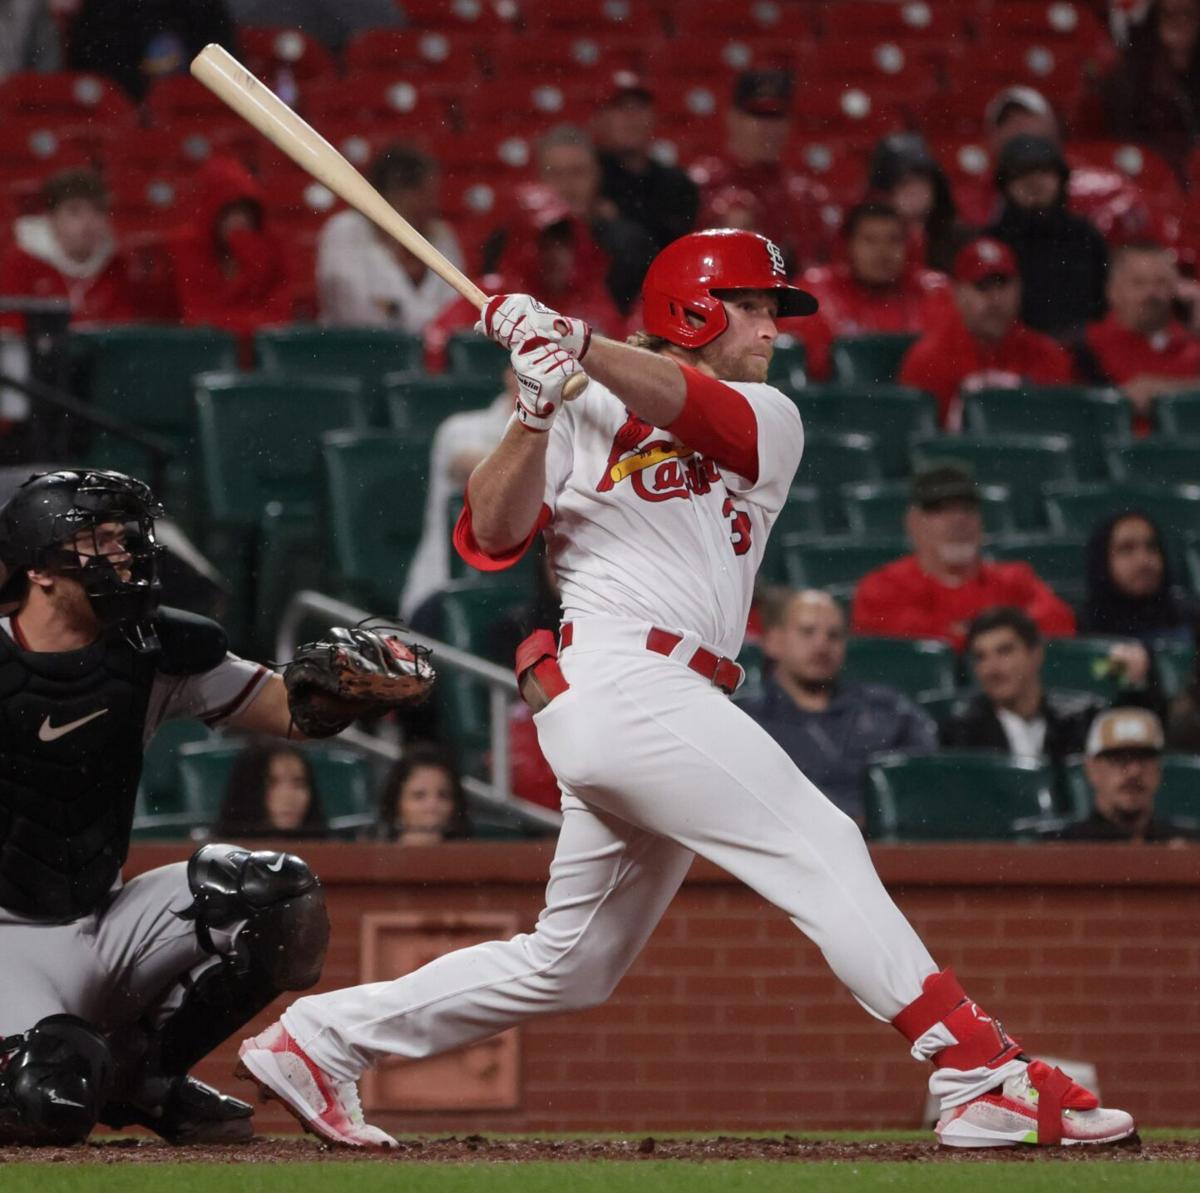 Breaking down Brendan Donovan's future with the St. Louis Cardinals